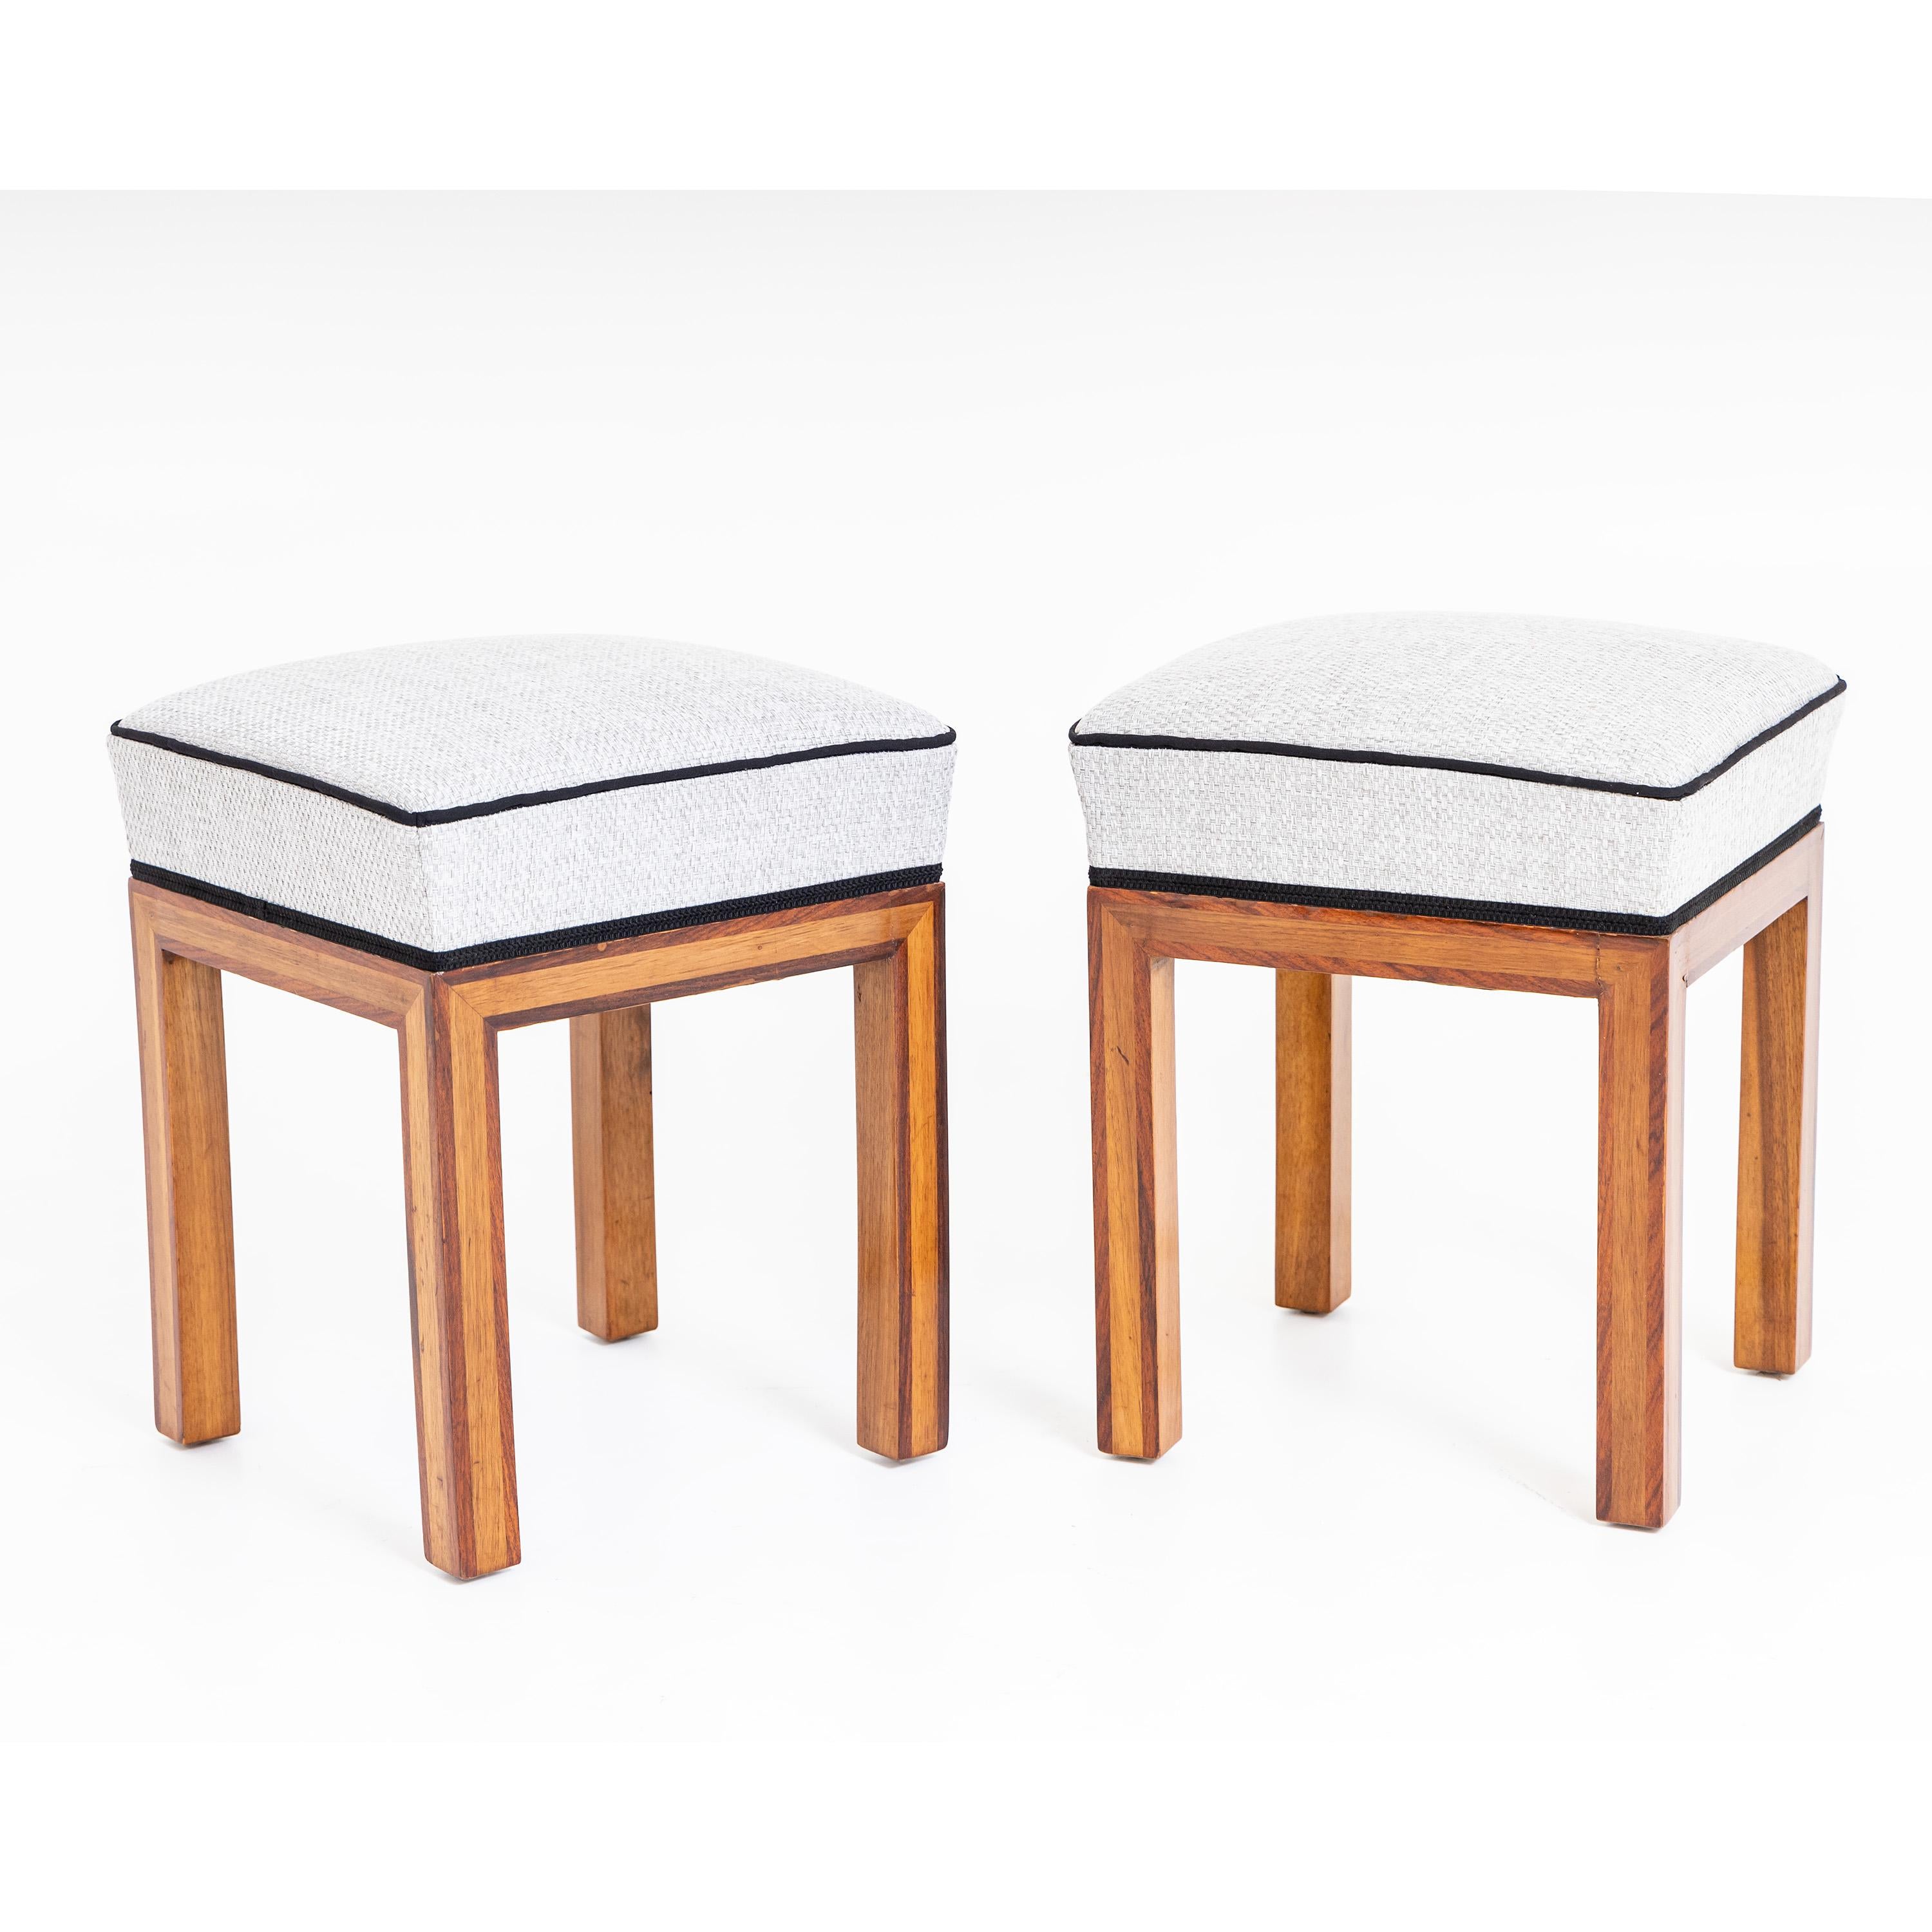 Pair of stools on straight square legs set off with a darker wood. The square upholstered seats were newly covered with a white fabric with black piping and edging.